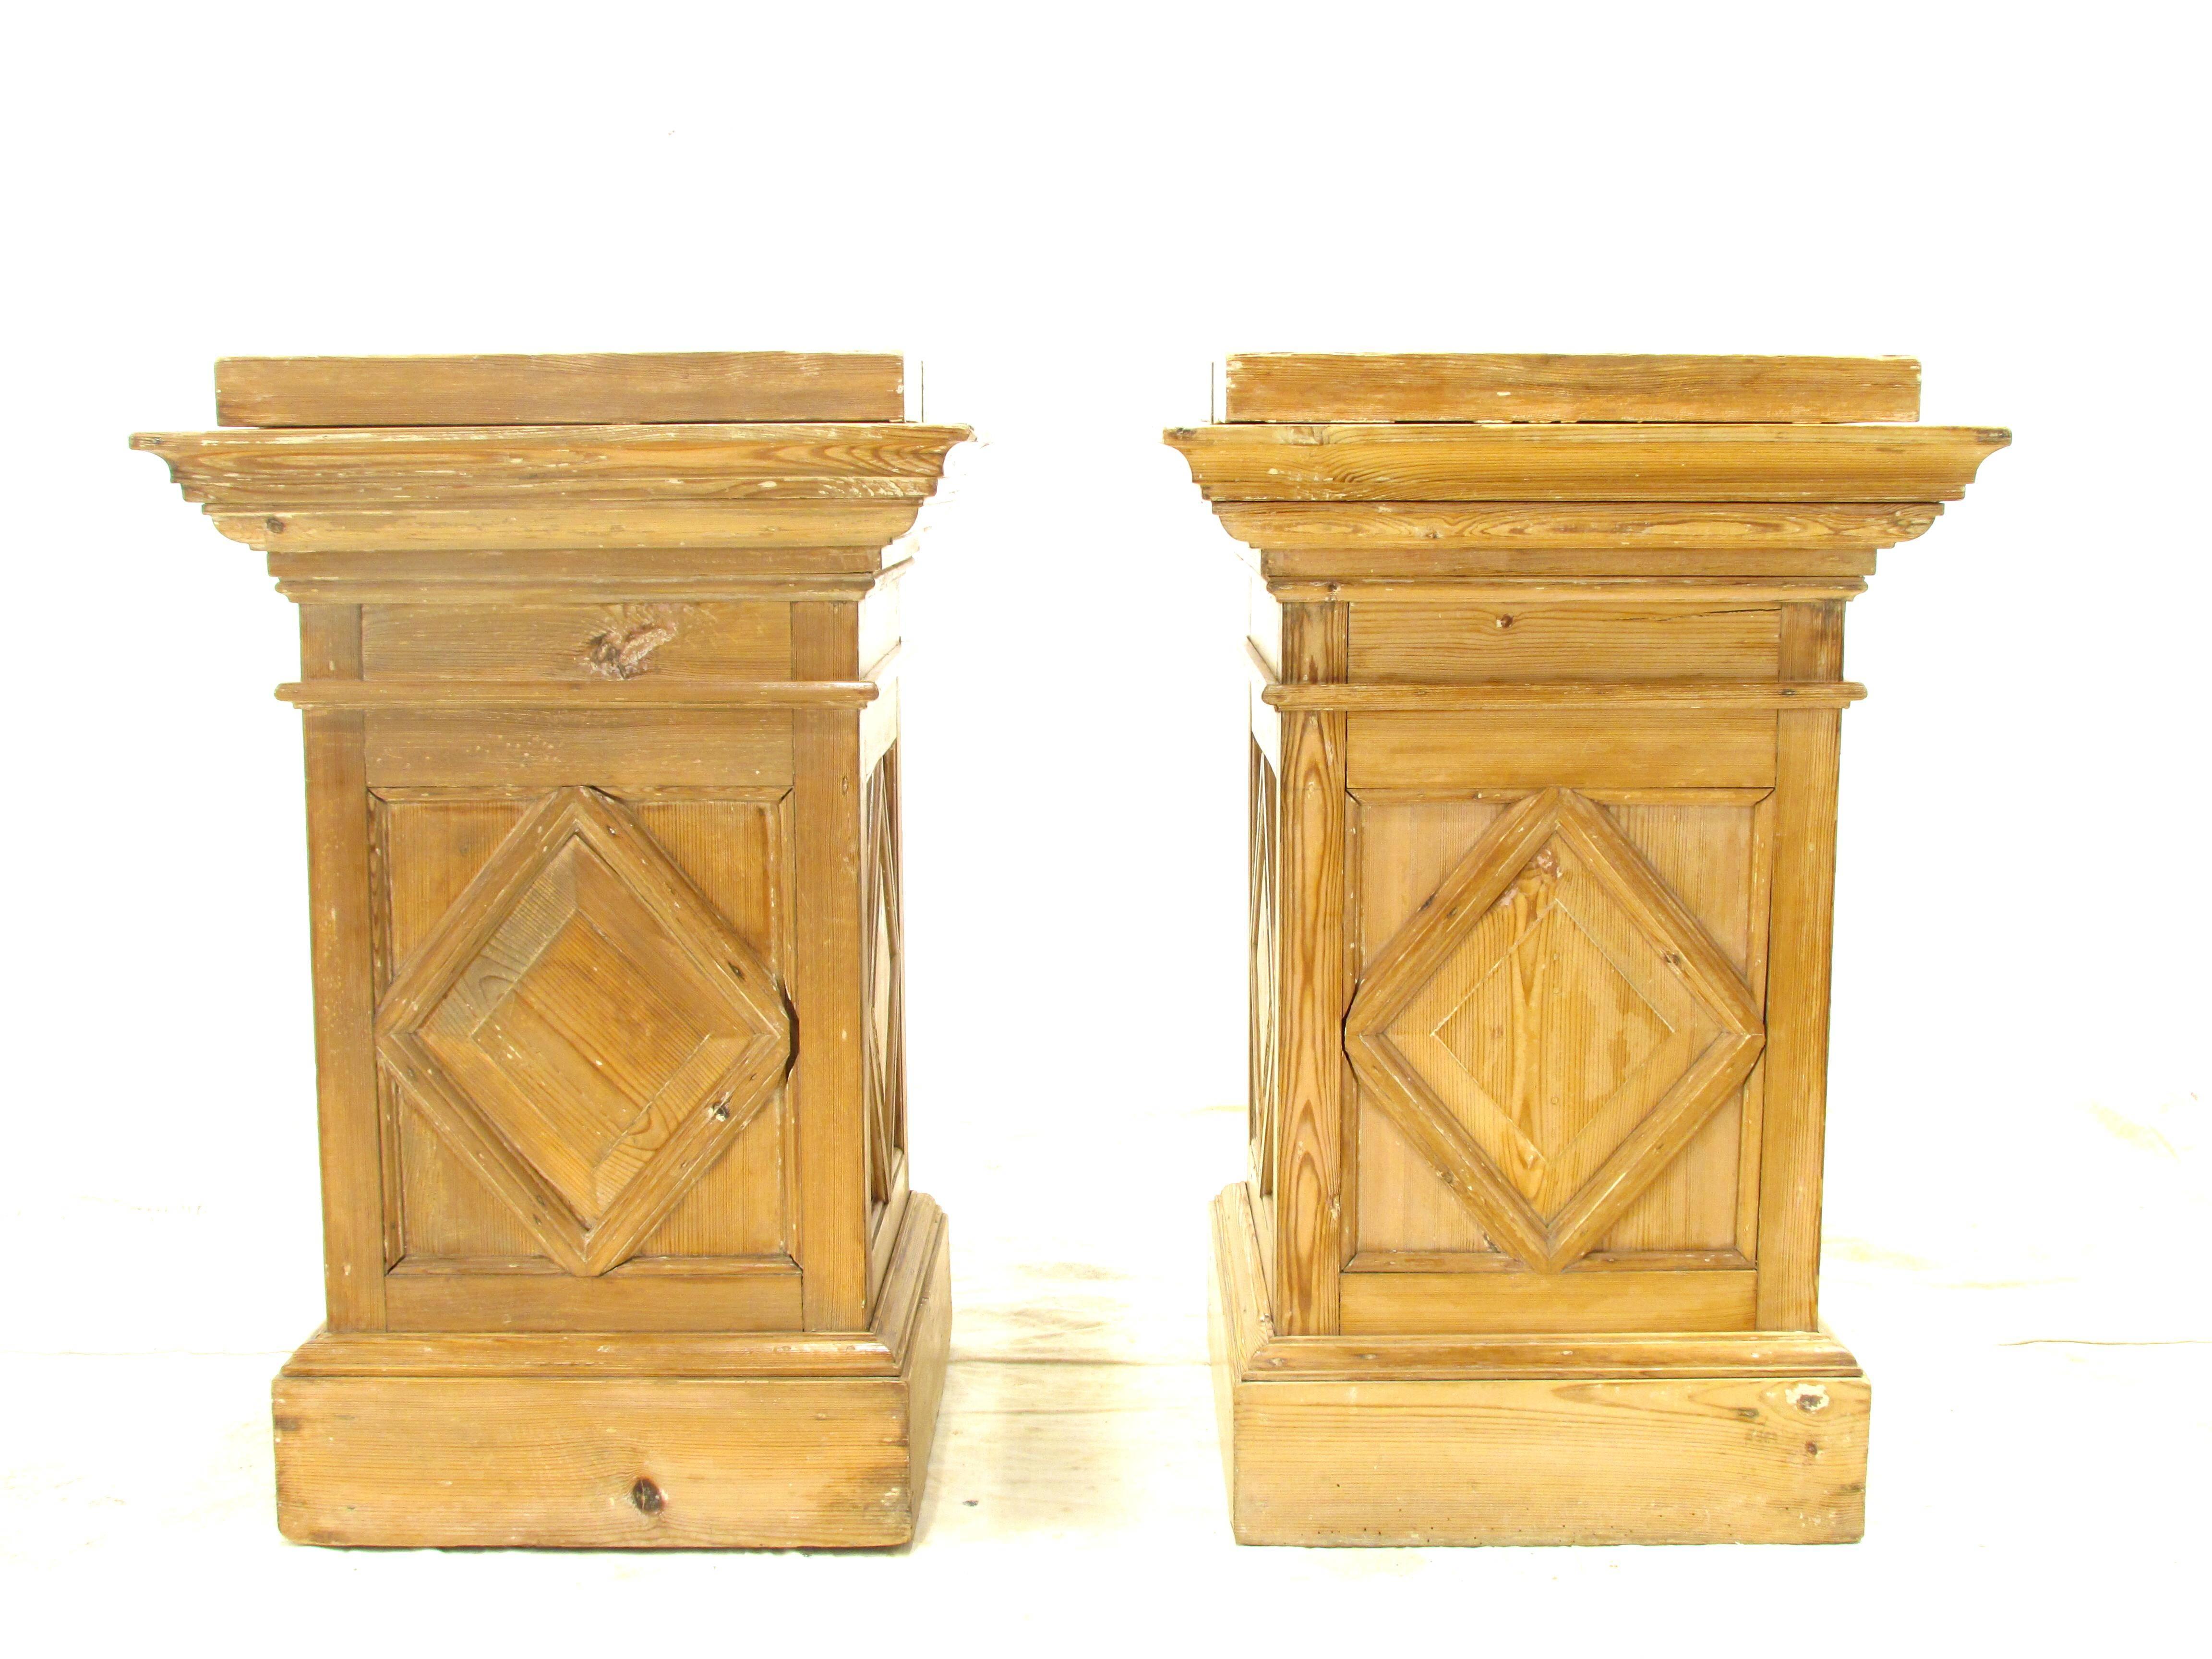 Beautiful pair of weathered and worn architectural detailed wooden pedestals or sculpture stands.